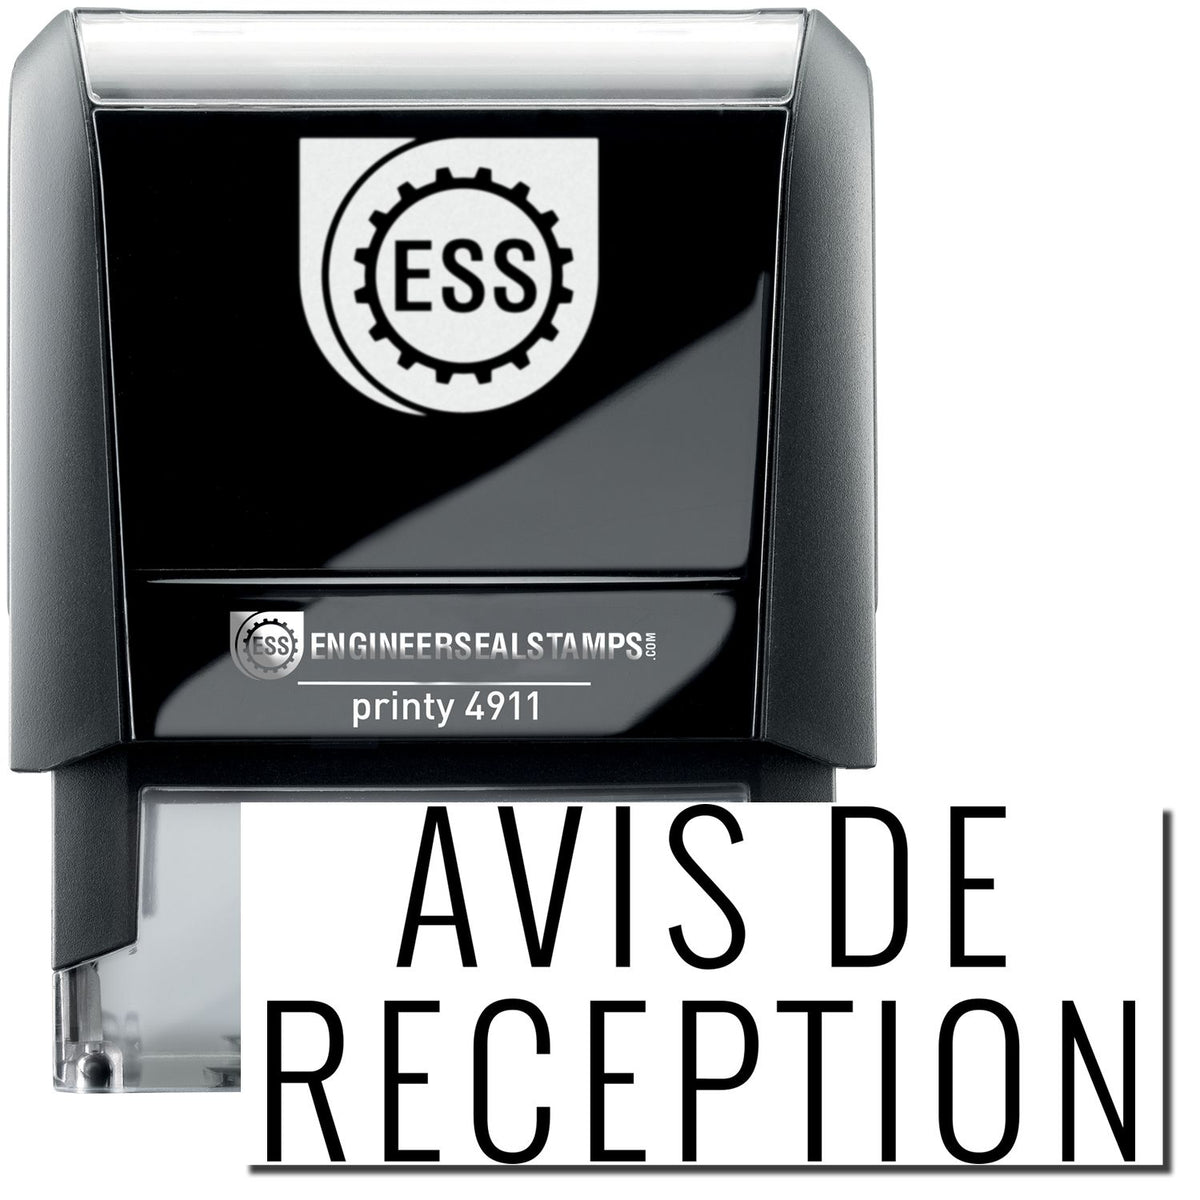 A self-inking stamp with a stamped image showing how the text &quot;AVIS DE RECEPTION&quot; is displayed after stamping.